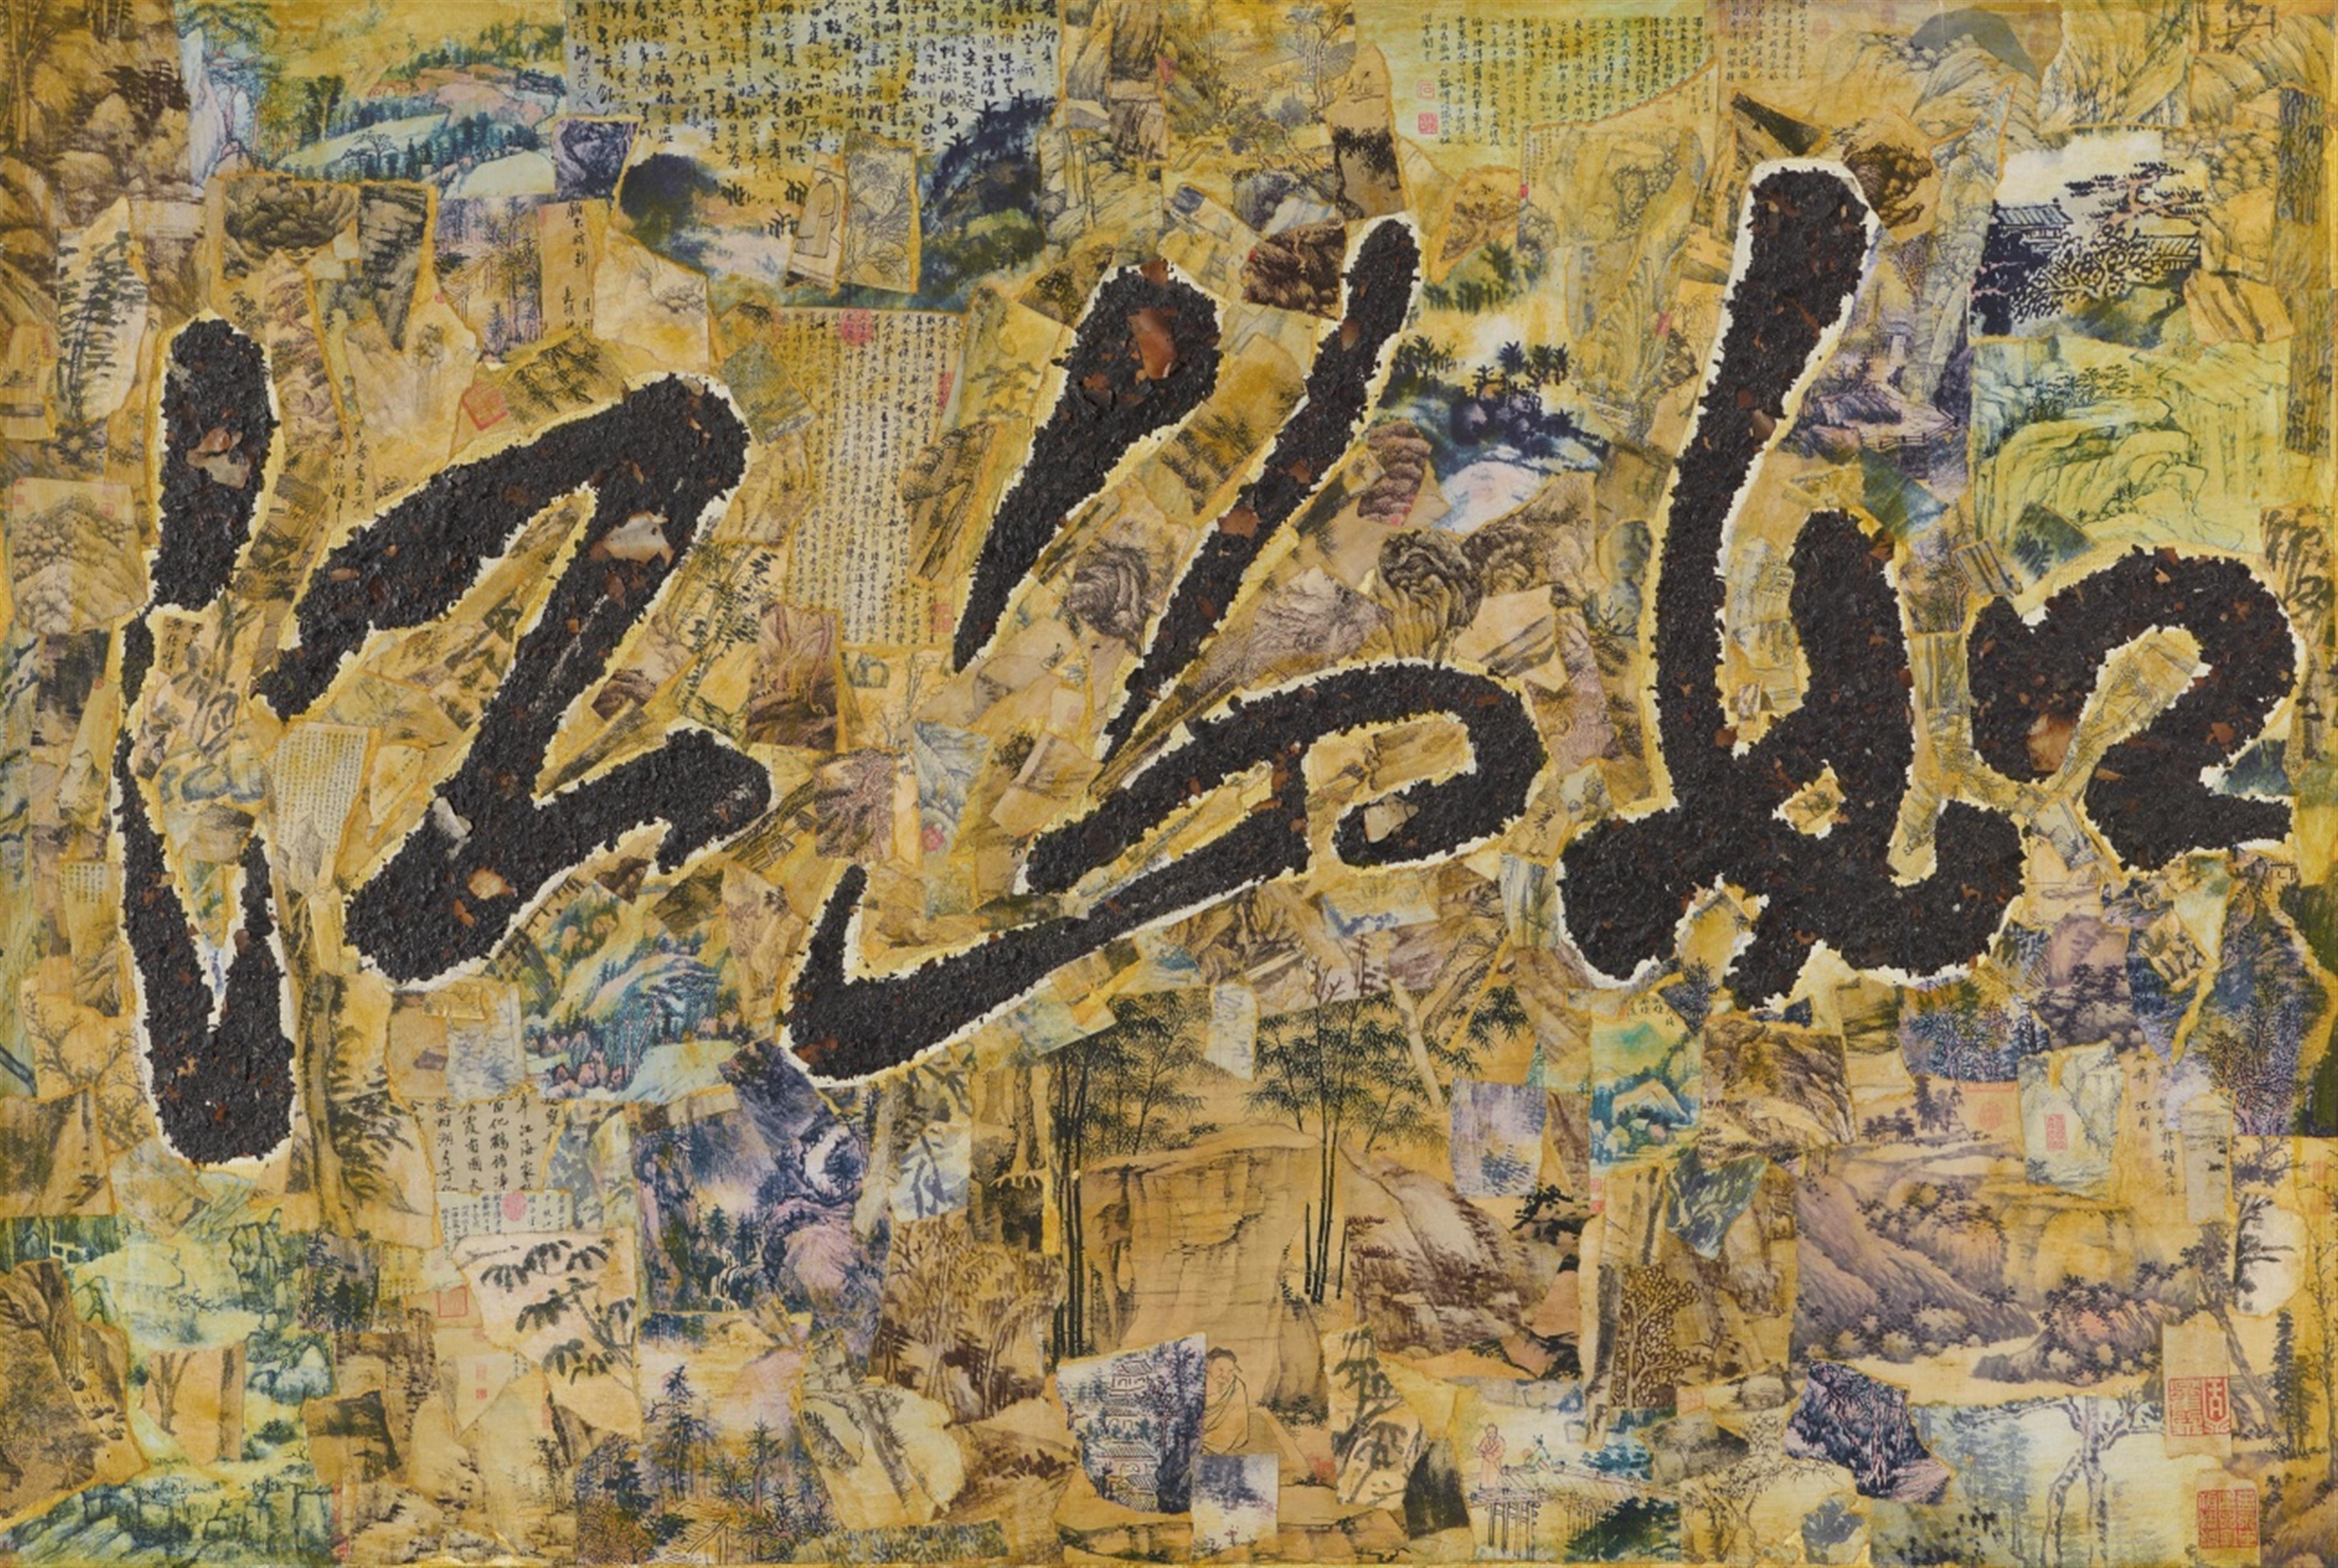 Xue Song . 1999 - "Jiangshan ruci duo jiao" (A land so rich in beauty, based on a poem by Mao Zedong). Oil and collage on canvas. Titled, signed and dated to the reverse: Xue Song, 1999.3. (2) - image-2